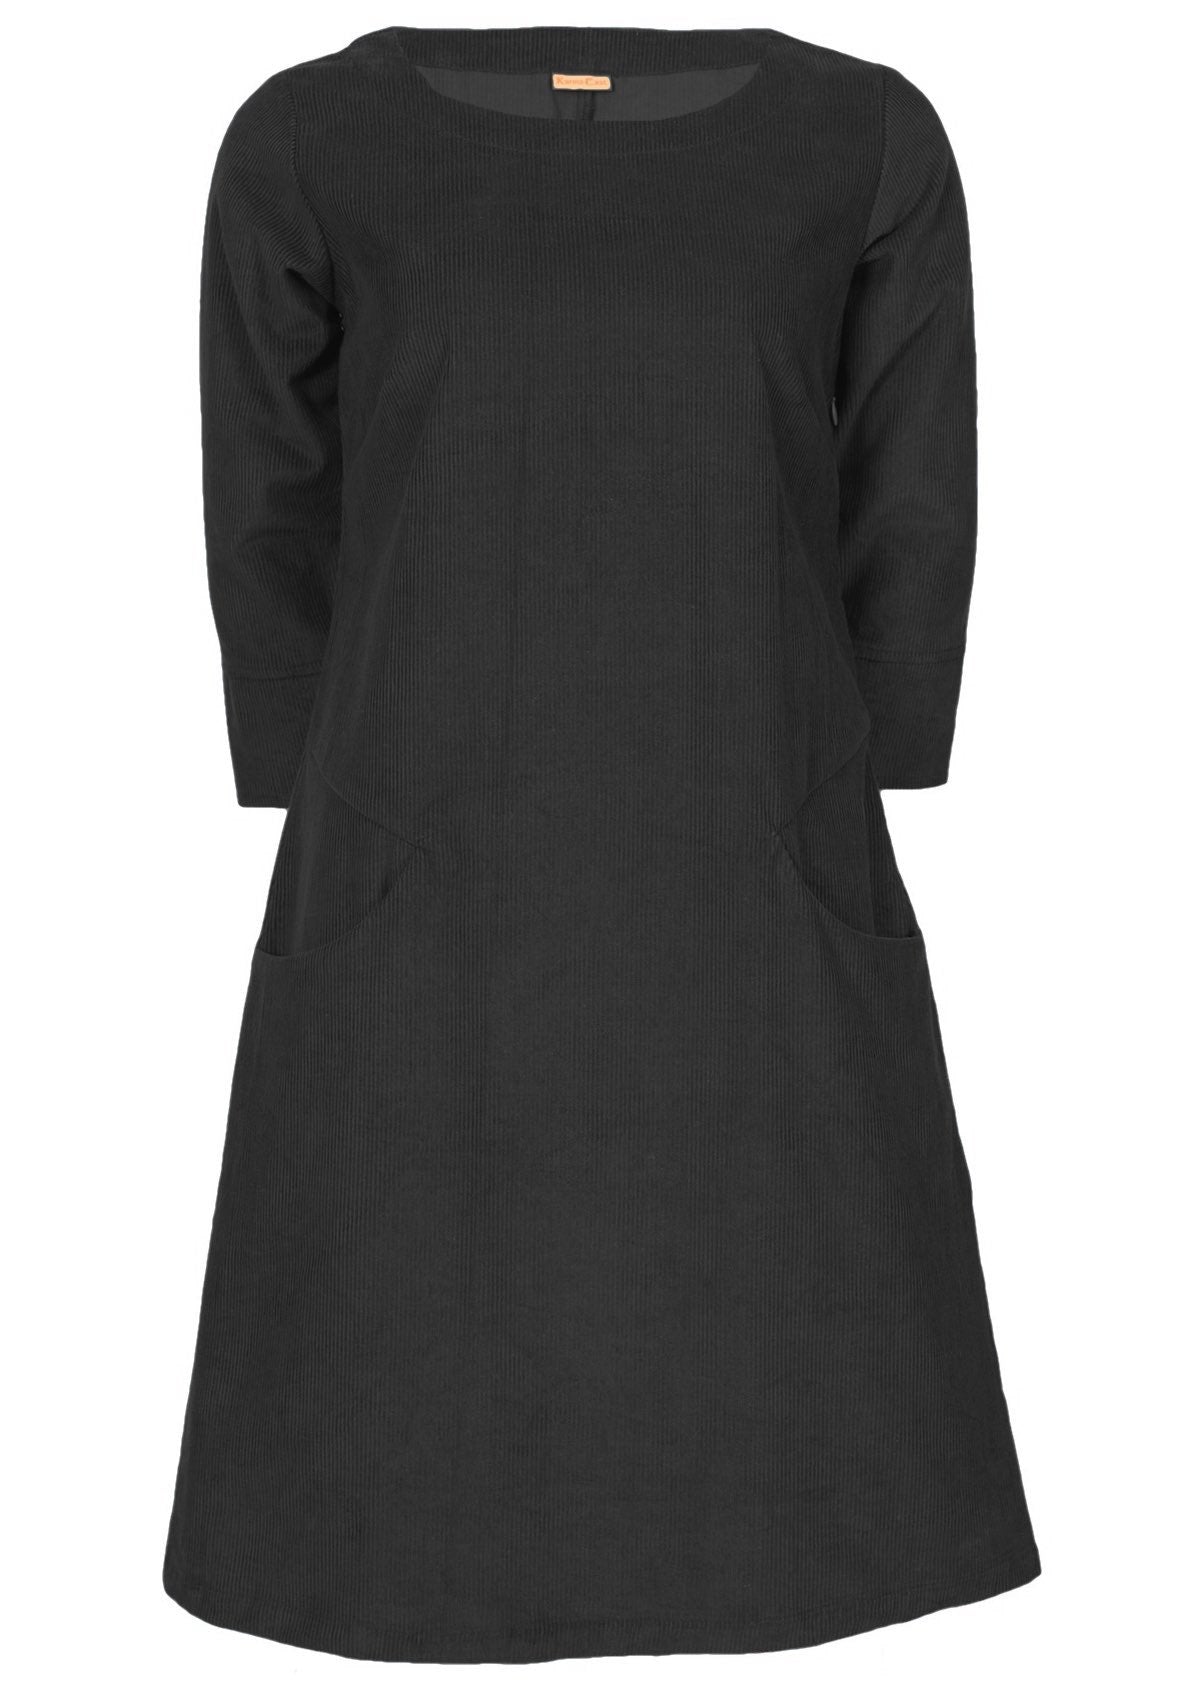 Grey Outer Space Jamie dress is made of 100% cotton corduroy. 